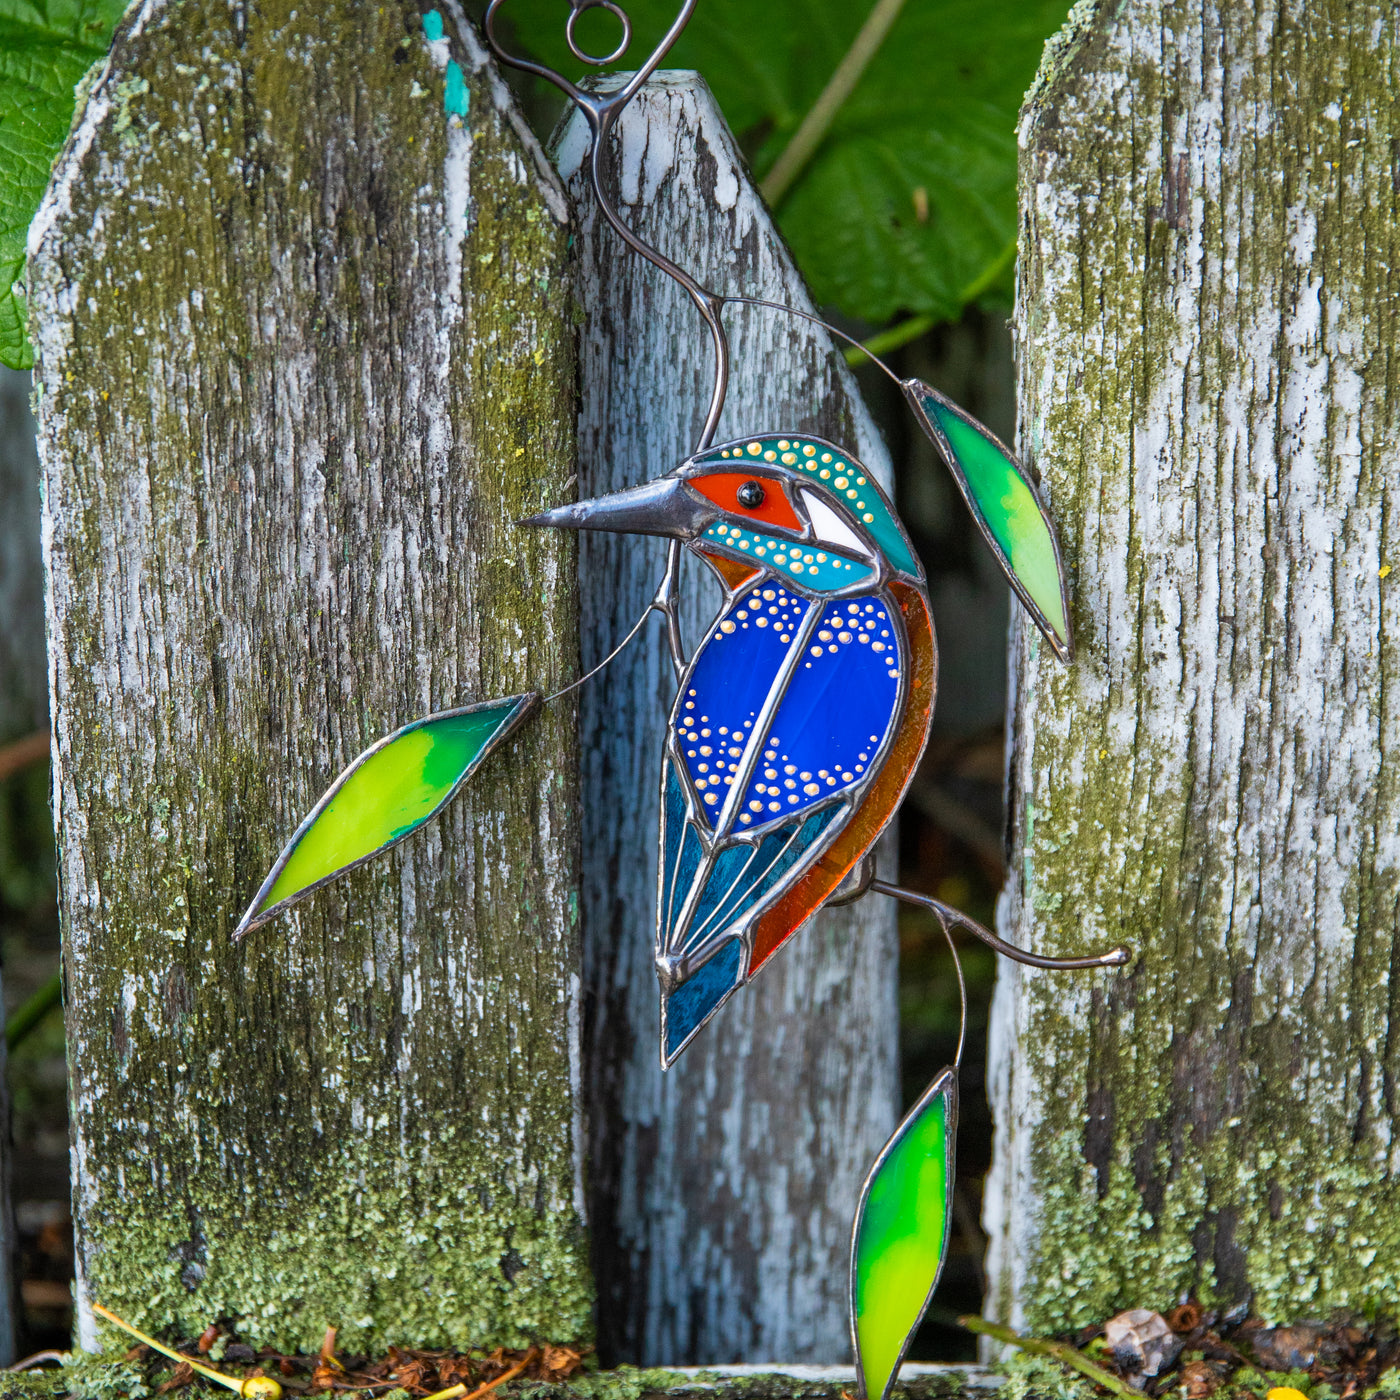 Stained glass suncatcher of a kingfisher on the branch